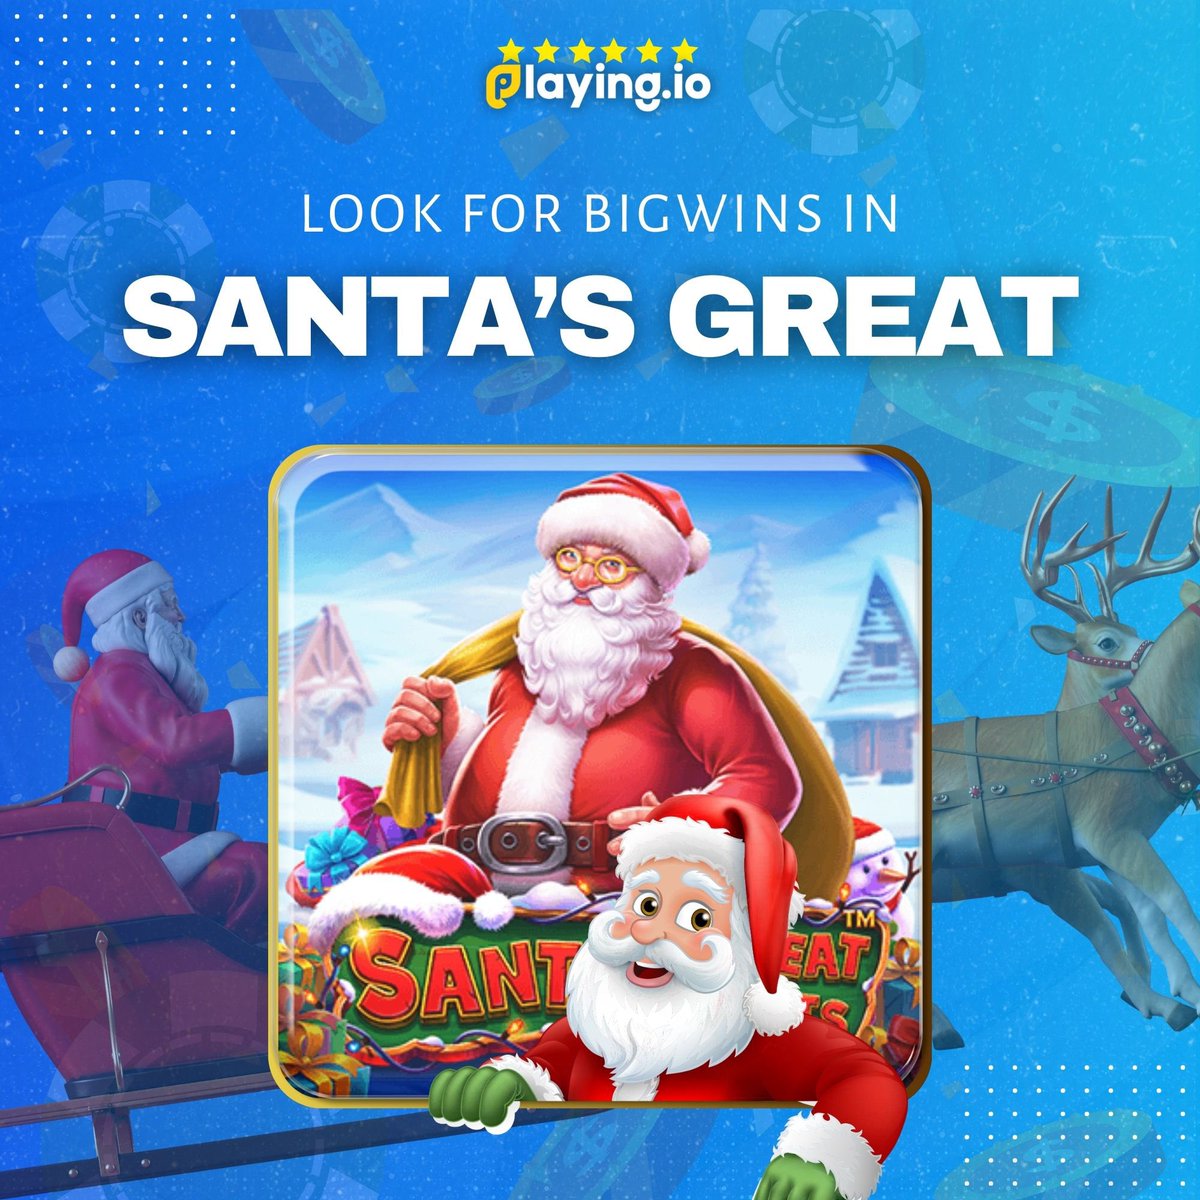 🎅🎁 Experience the joy of the season with 'Santa's Great Gift' at PLAYING.IO! Unwrap surprises, spin the reels, and discover festive wins. Ready to unwrap your gifts from Santa? Play now! #SantasGreatGift #FestiveWins #HolidayJoy 🎄🎅🎰